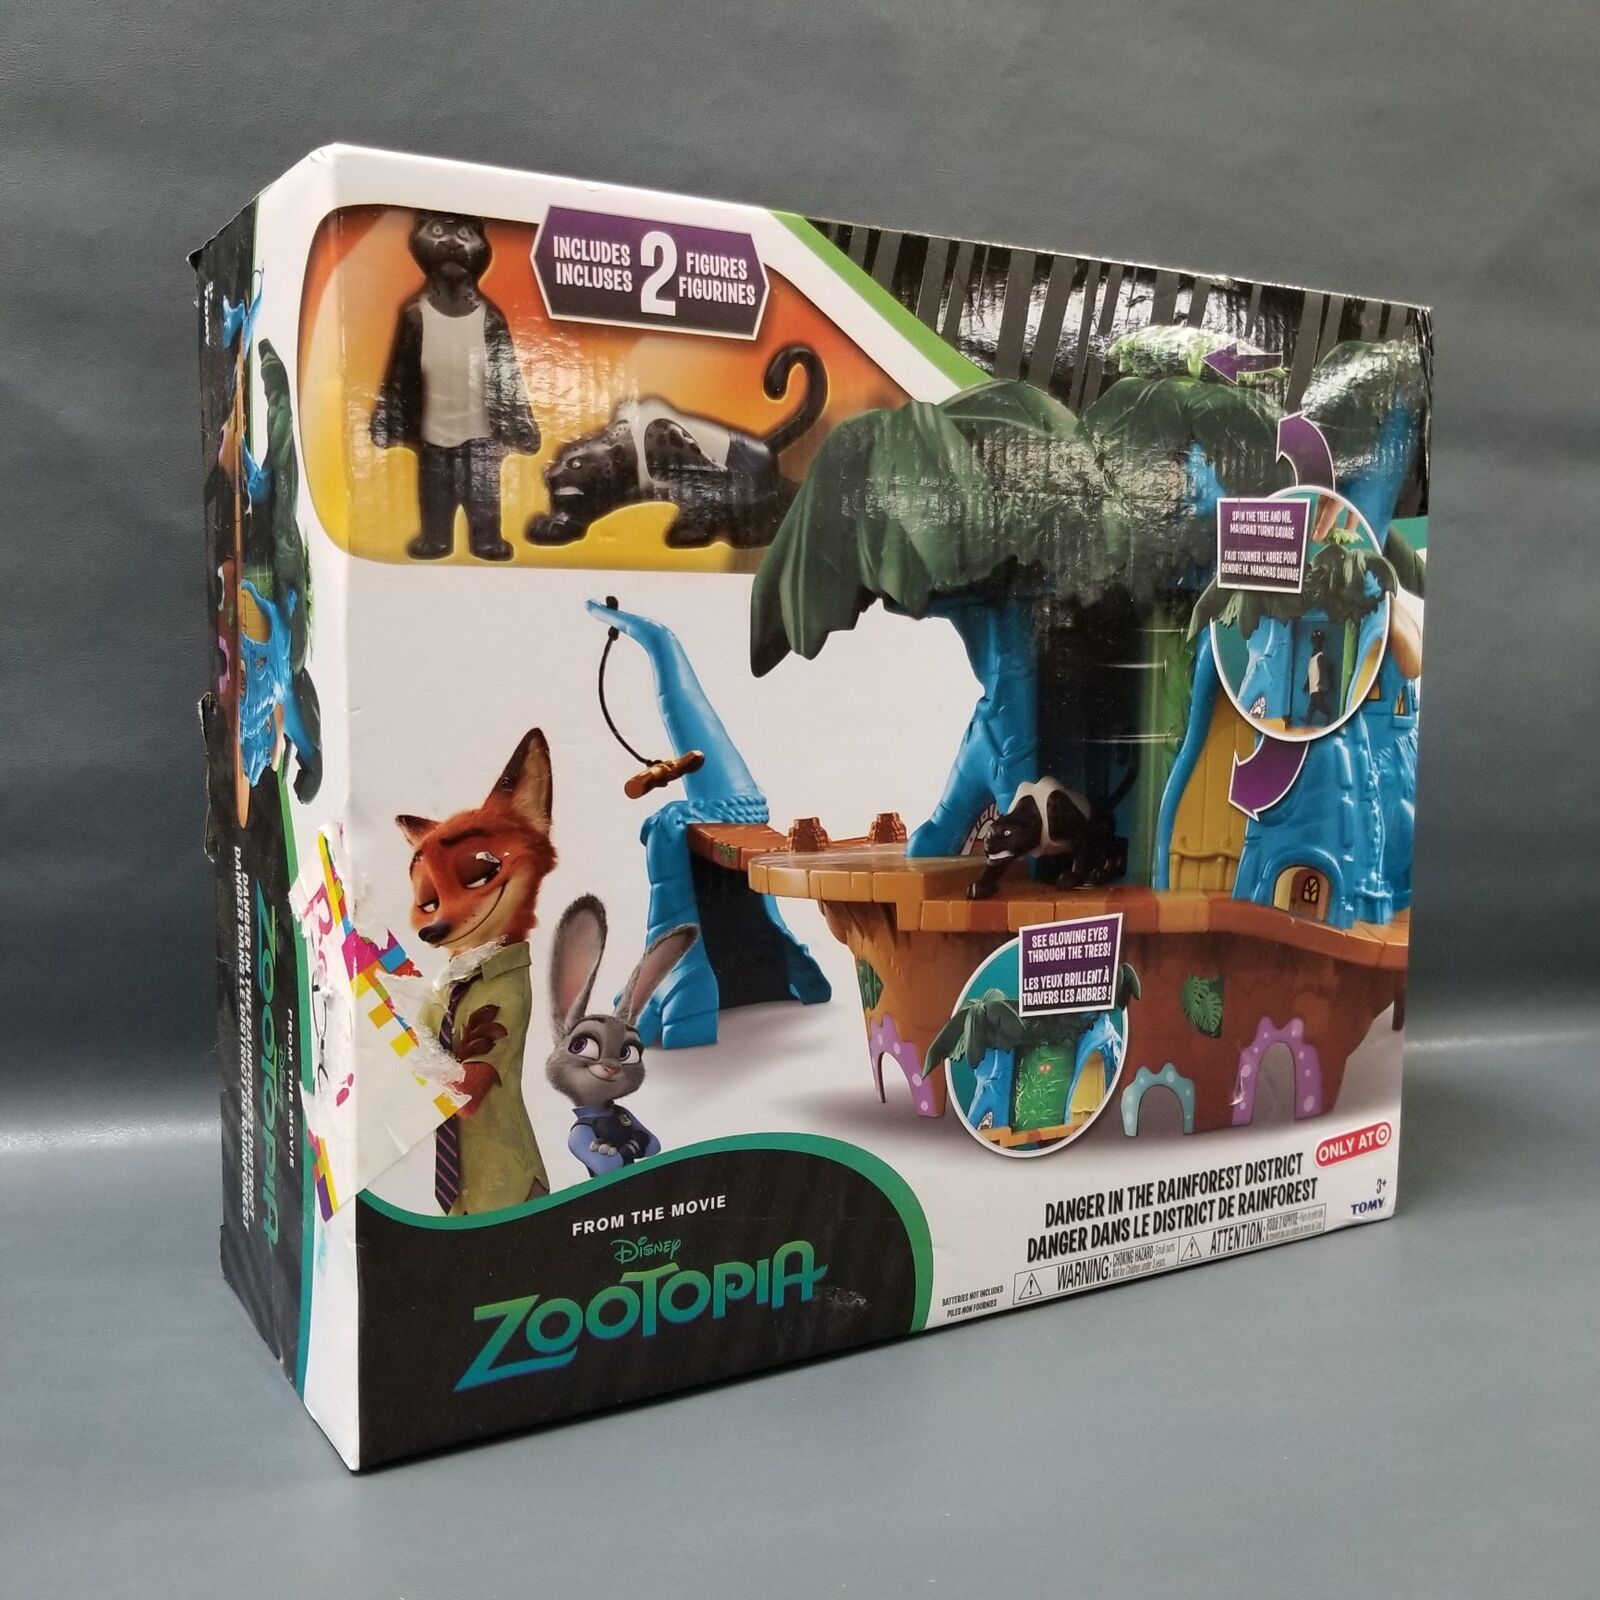 NEW Sealed - Tomy Disney Zootopia Danger in Rainforest District Playset